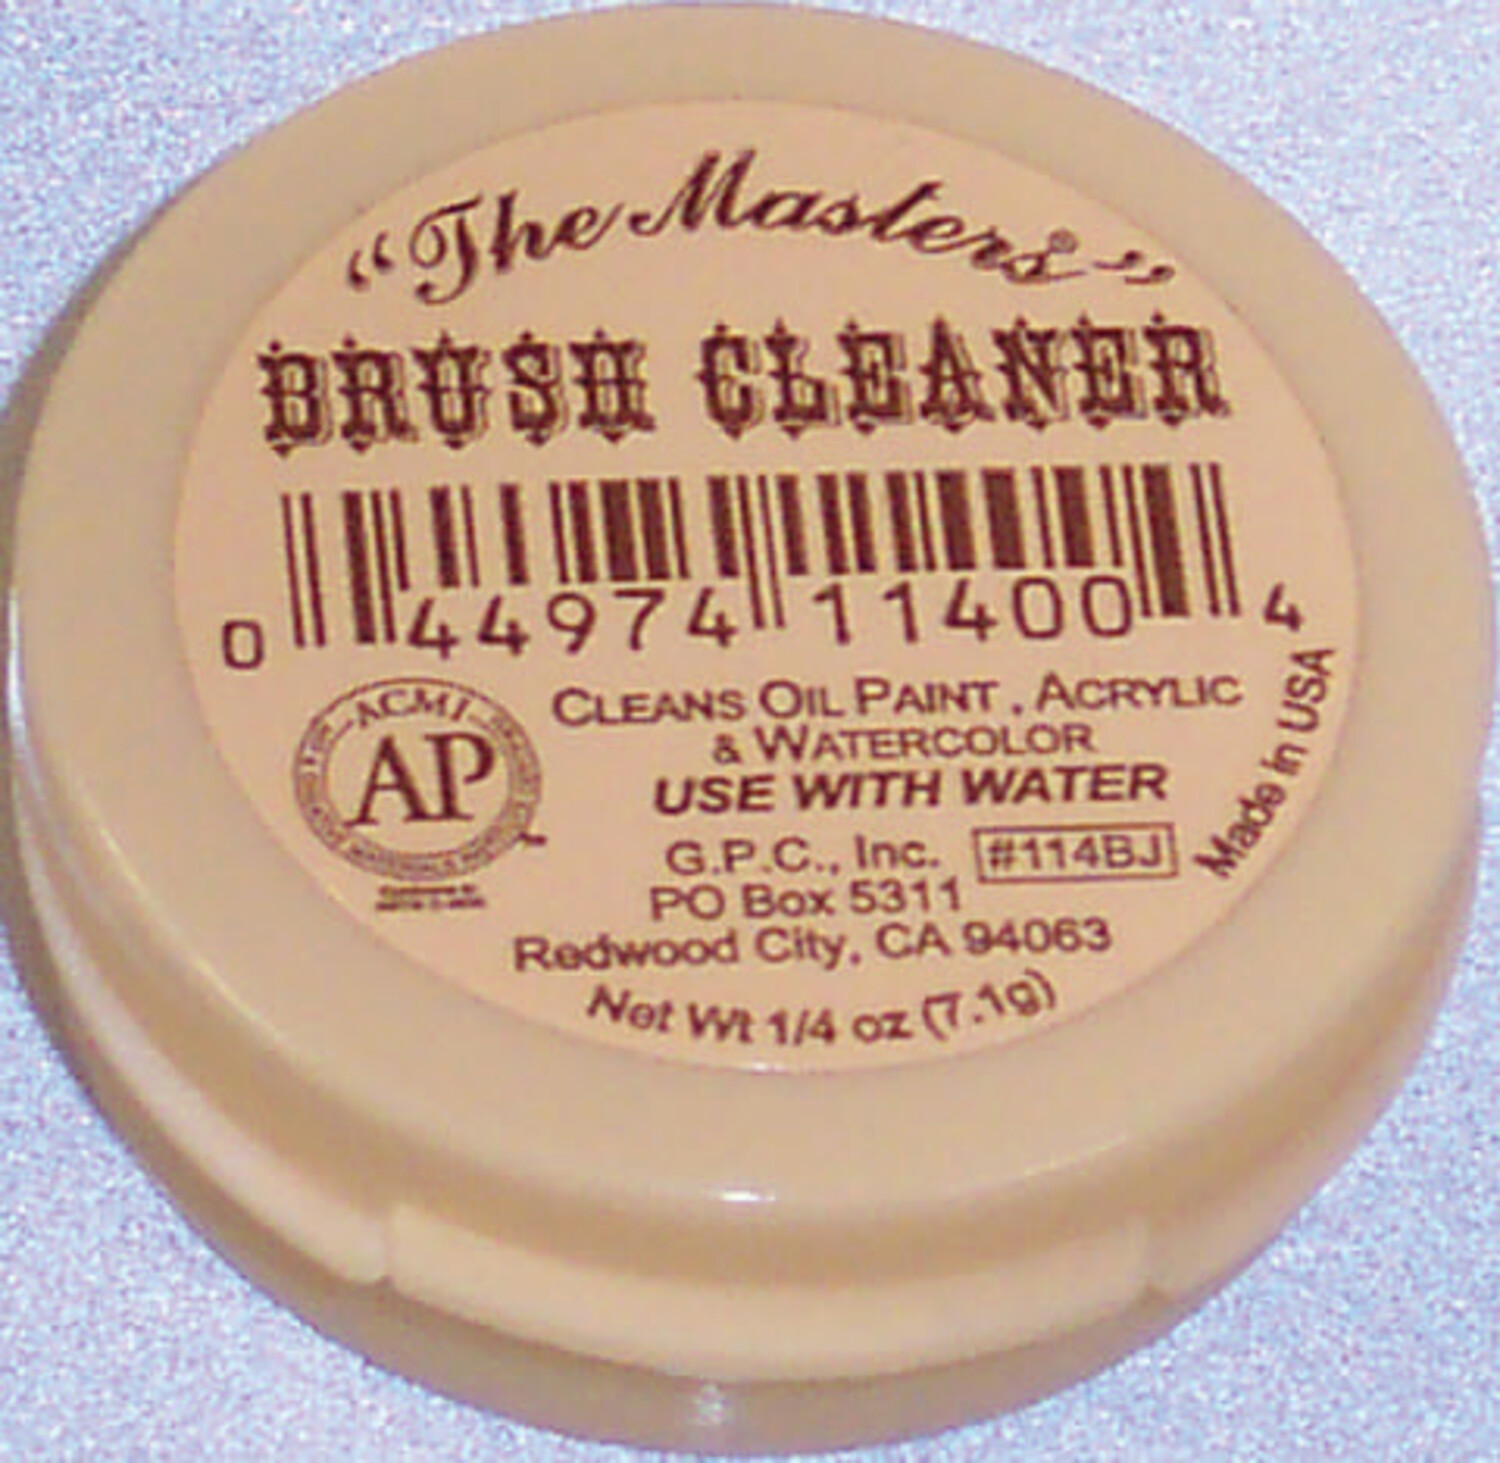 B&J The Masters Brush Cleaner and Preserver